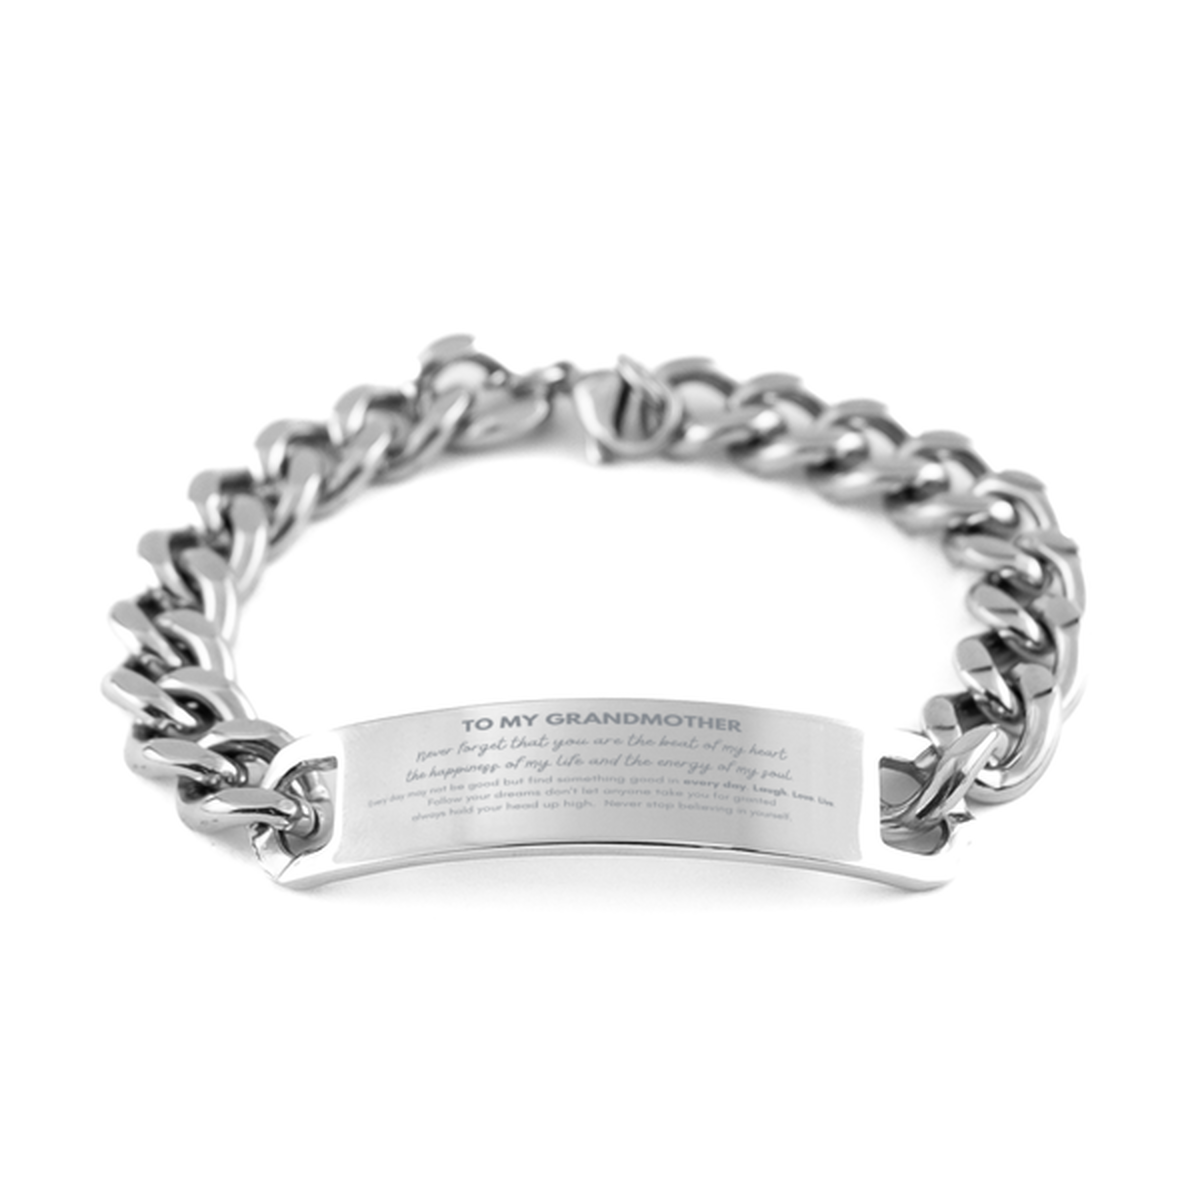 To My Grandmother Bracelet Gifts, Christmas Grandmother Cuban Chain Stainless Steel Bracelet Present, Birthday Unique Motivational For Grandmother, To My Grandmother Never forget that you are the beat of my heart the happiness of my life and the energy of